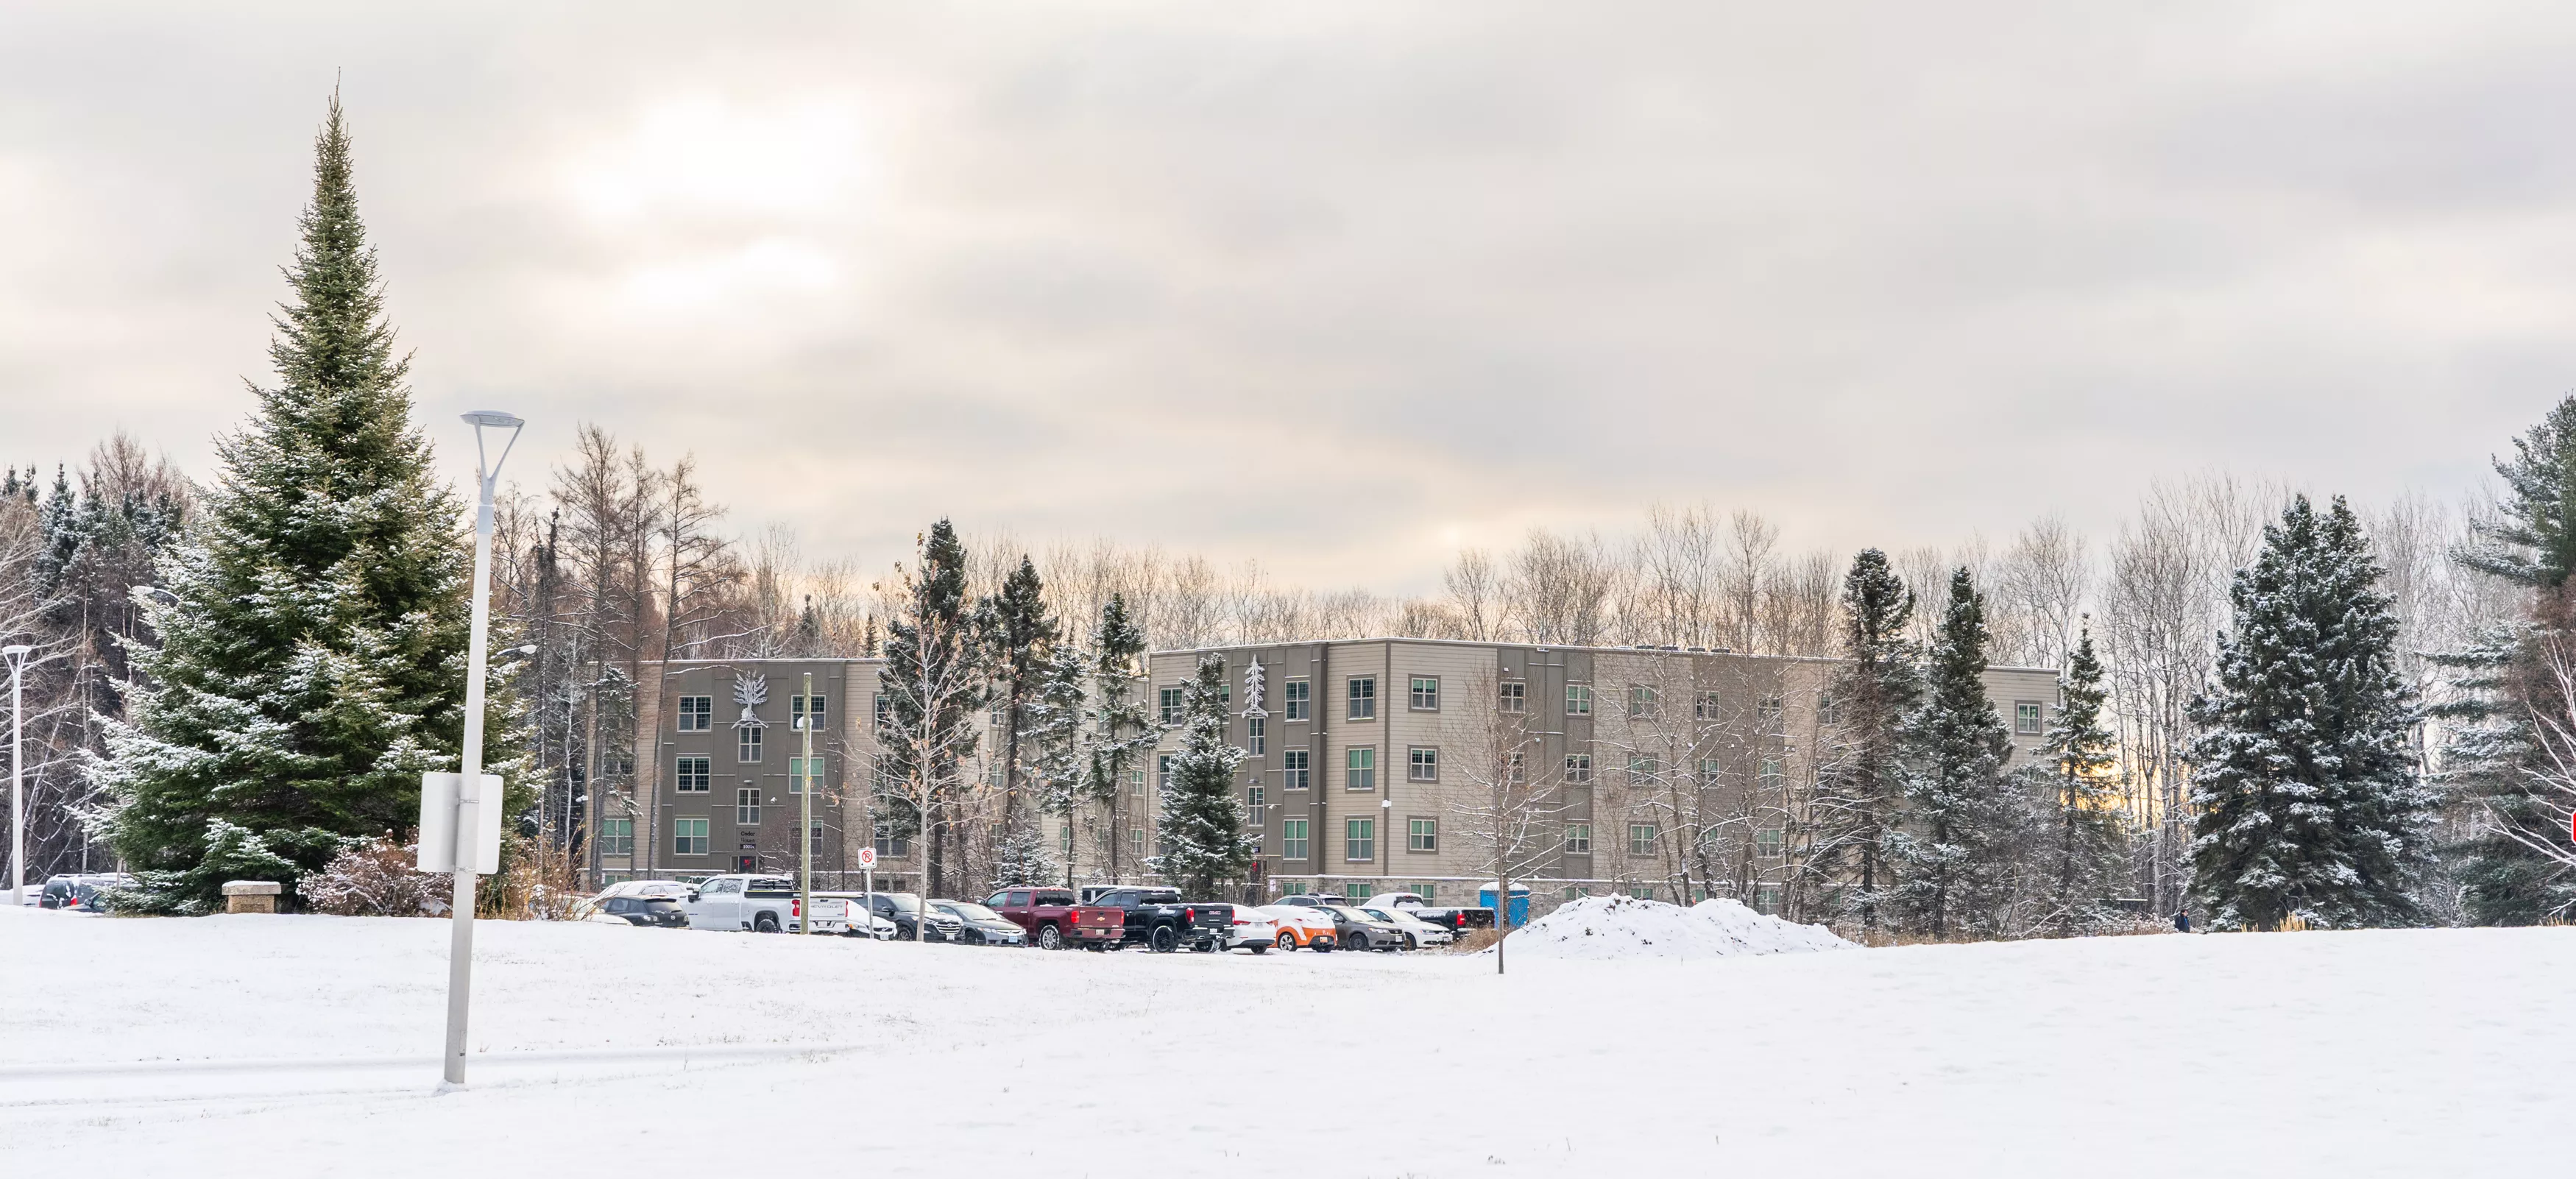 Confederation College during the winter